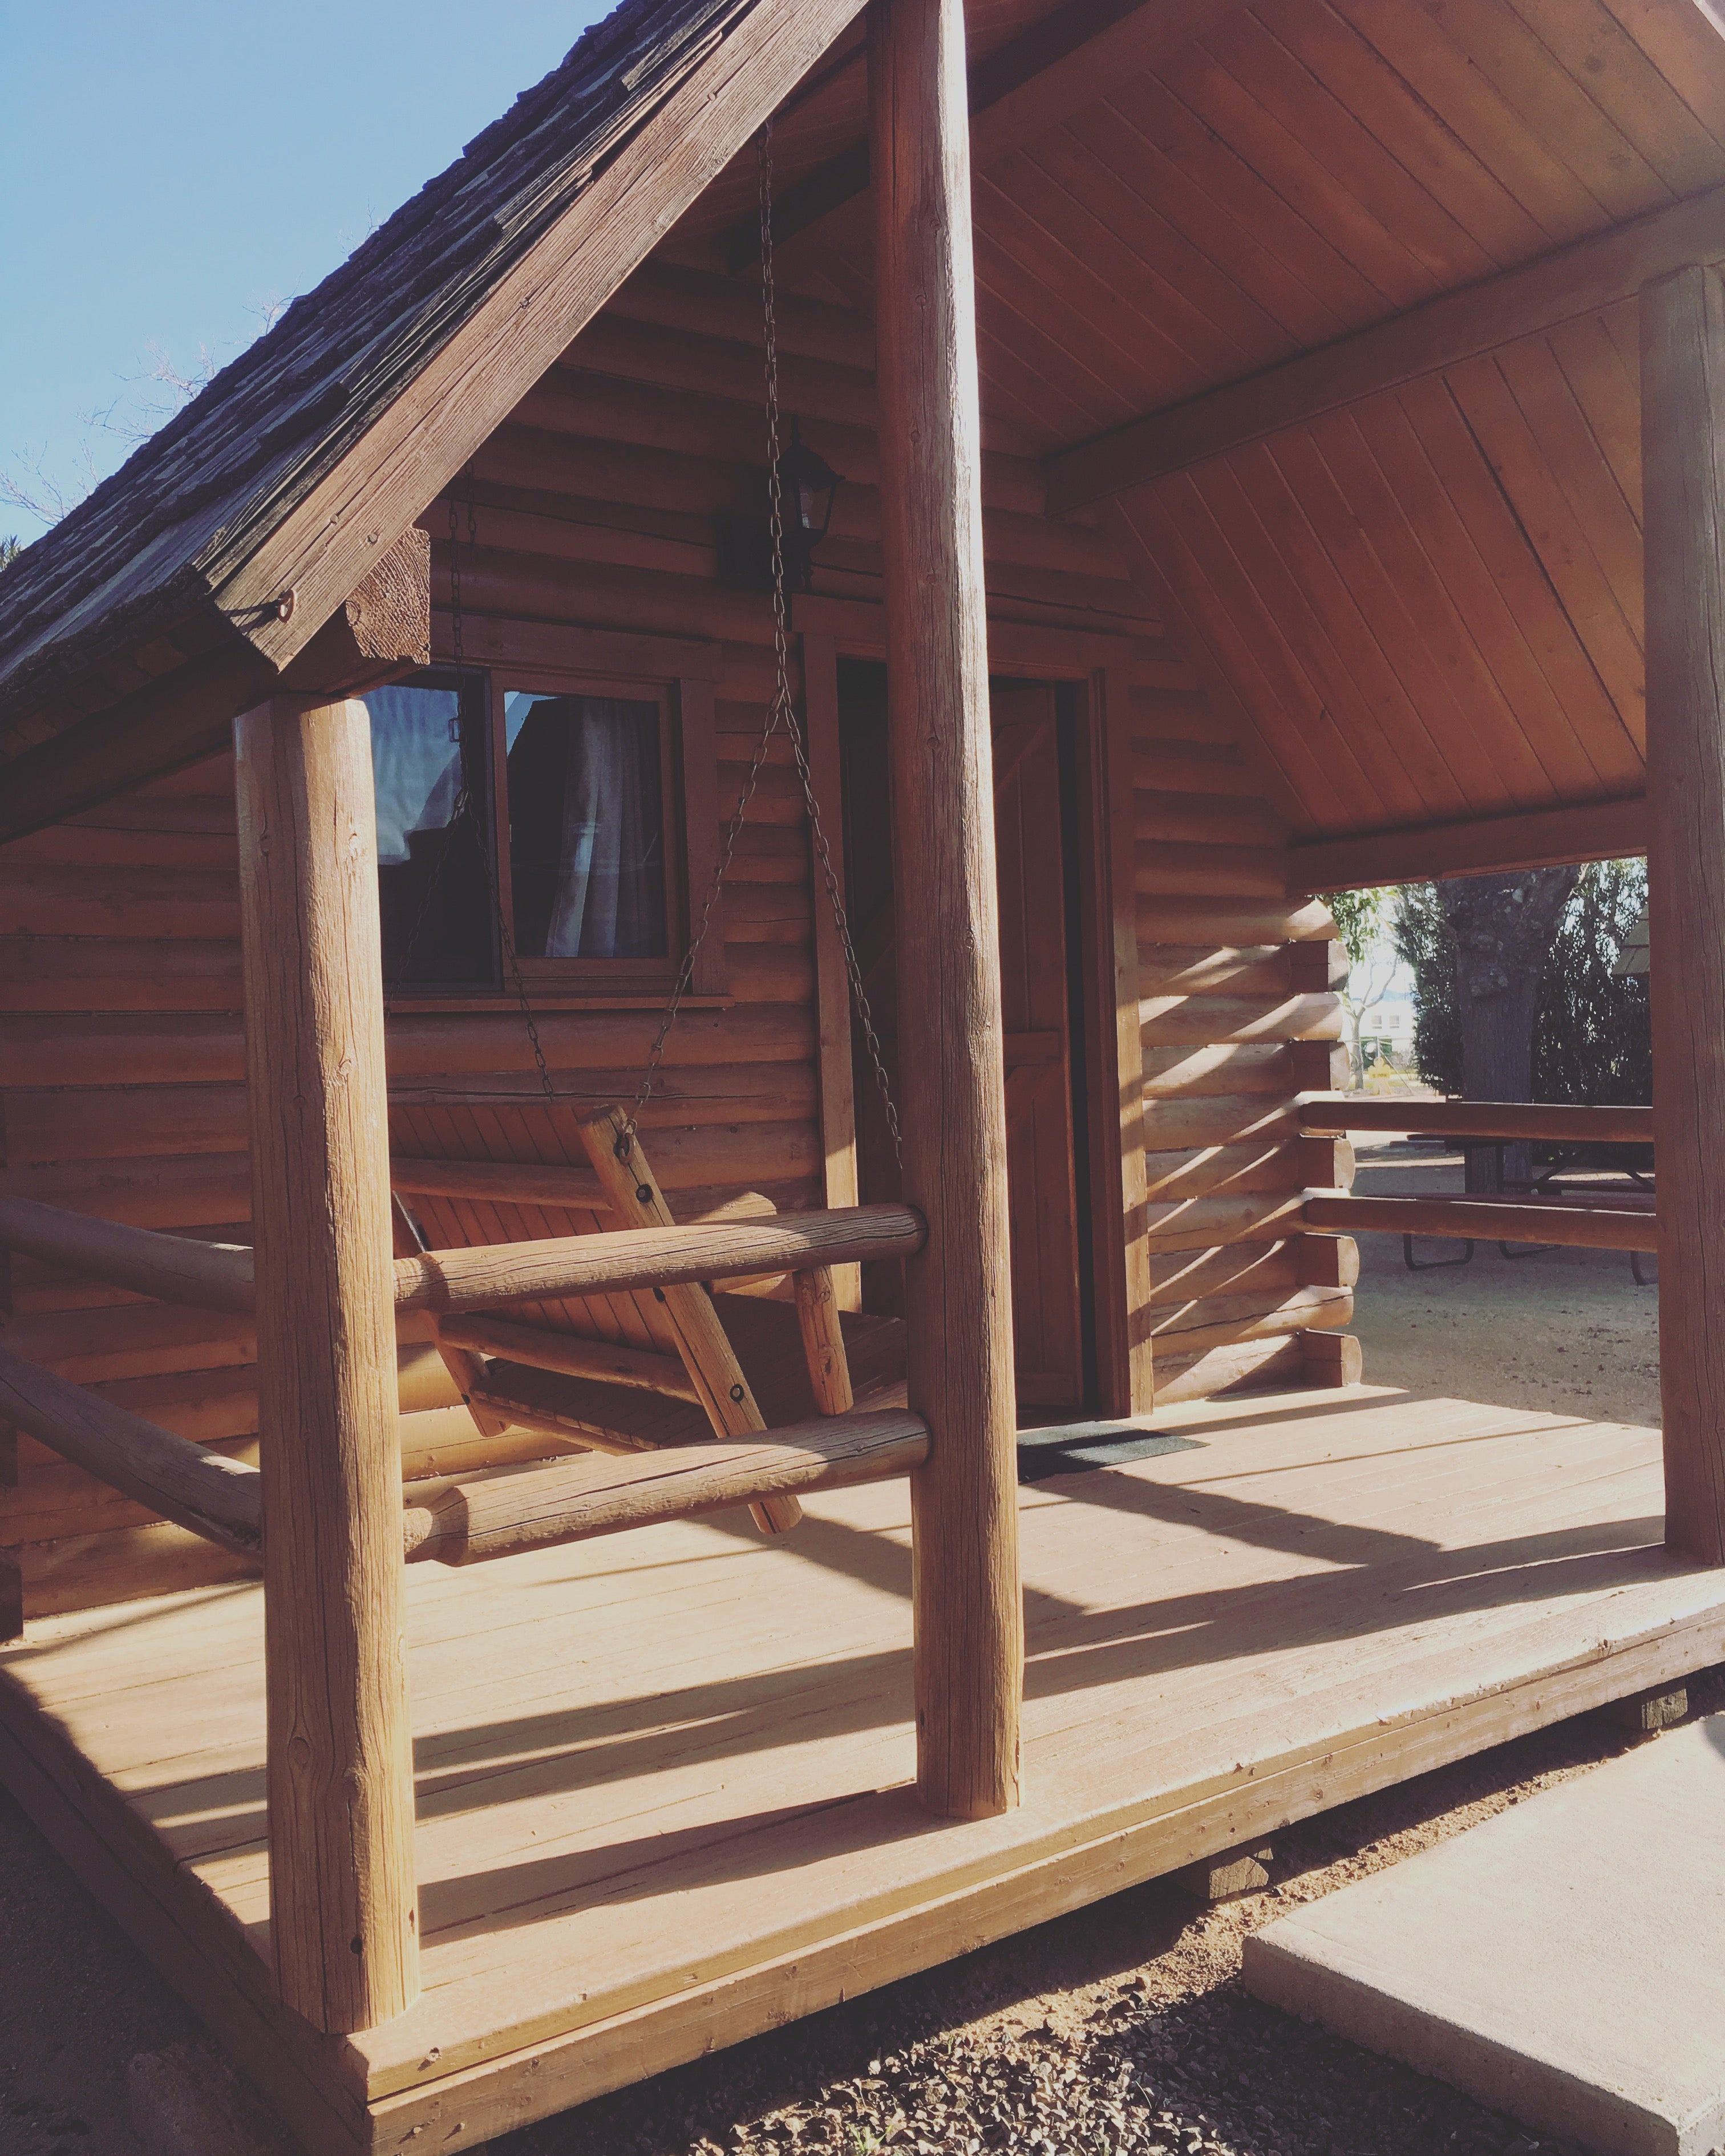 Camper submitted image from Kingman KOA - 4